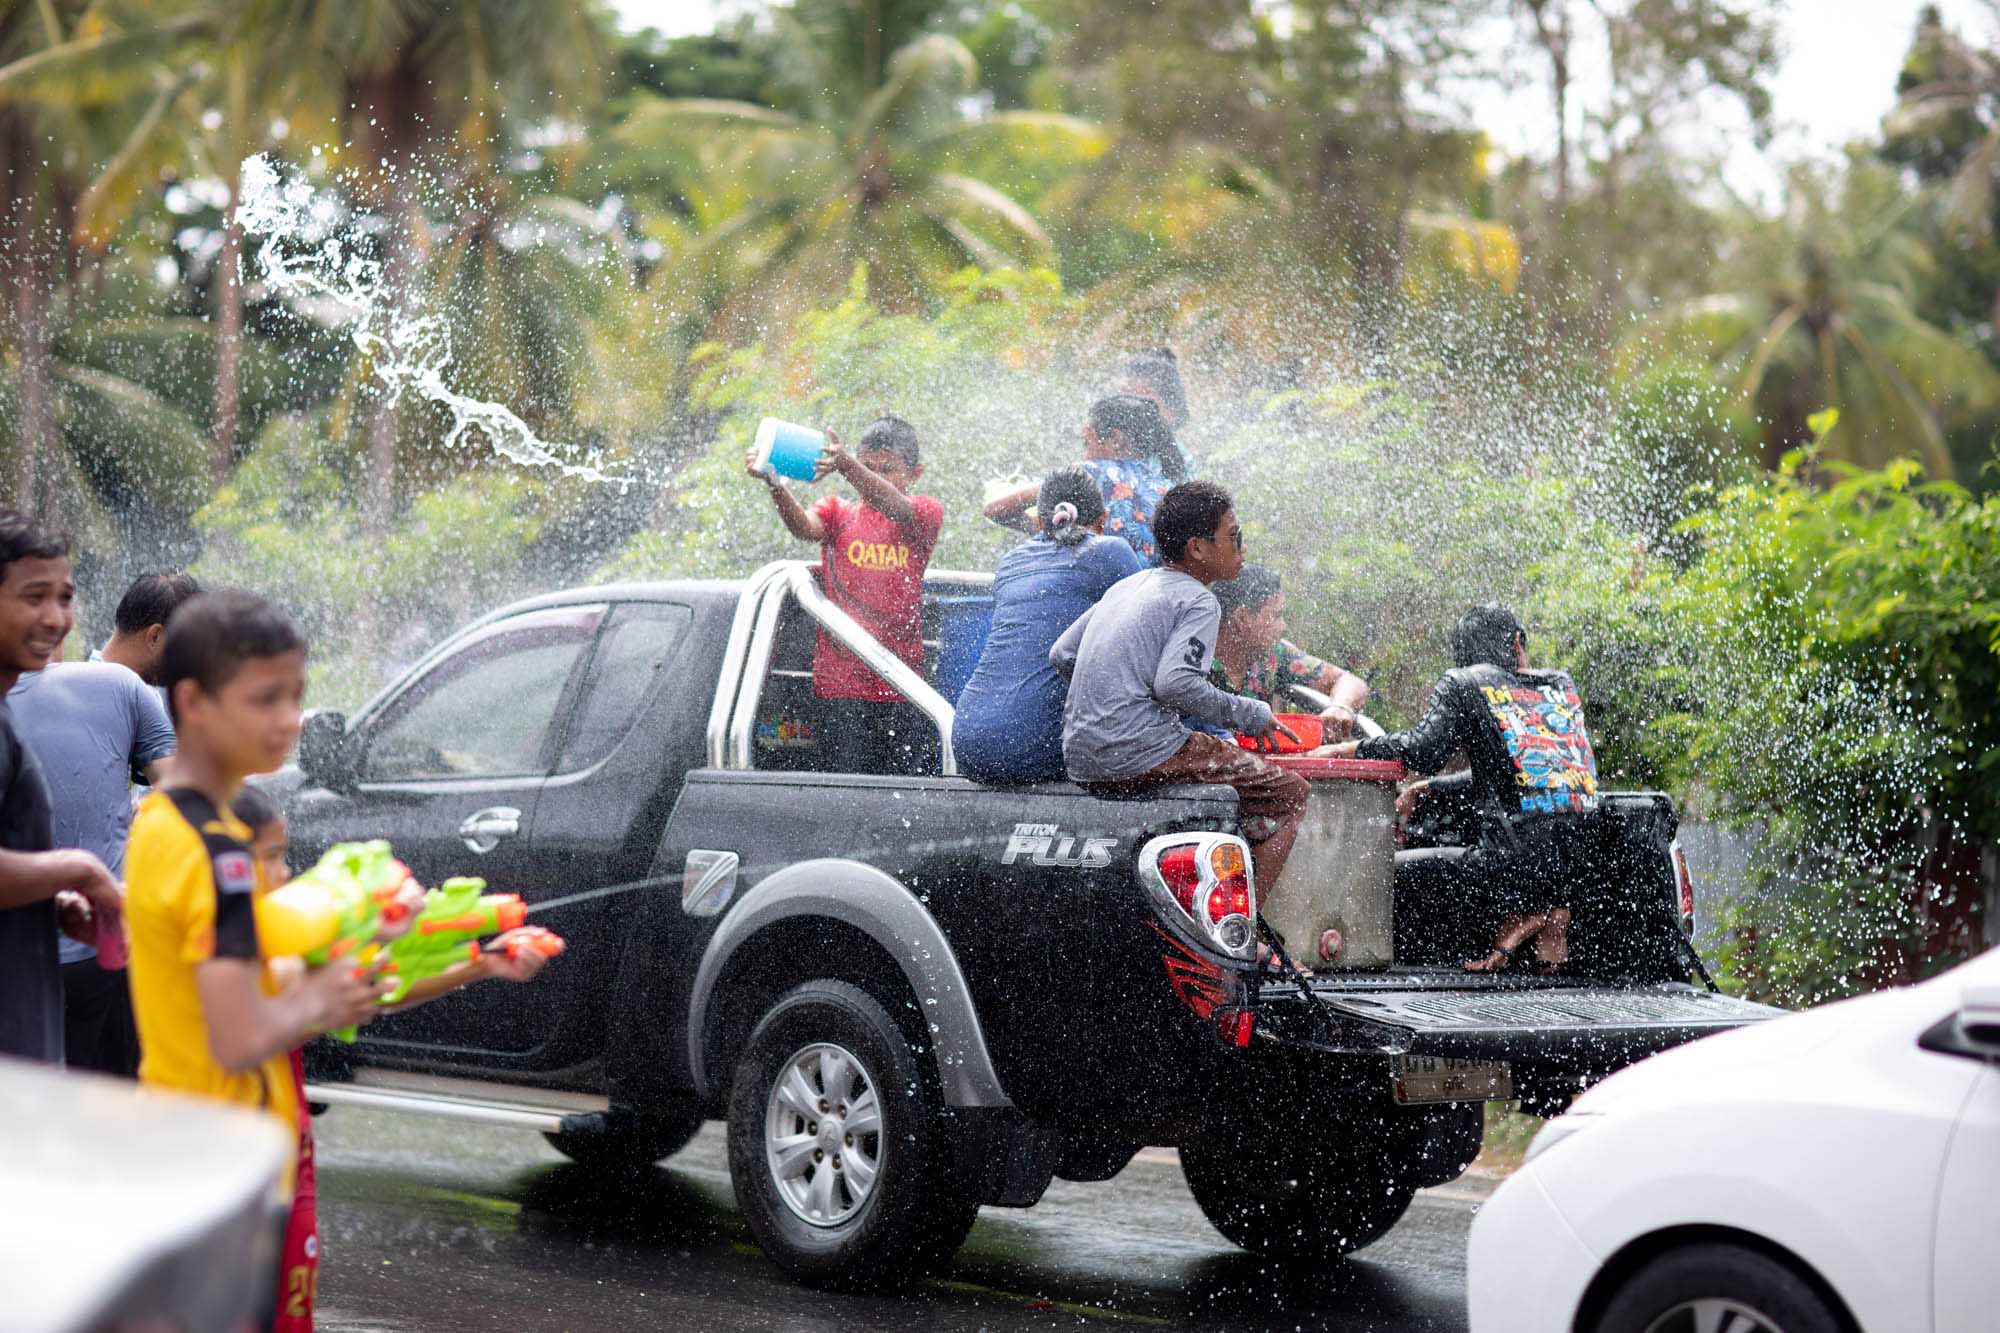 Water fight in traffic - Songkran water festival in Phuket, Thailand | Street Photography | Travel Photography | Festival Photography